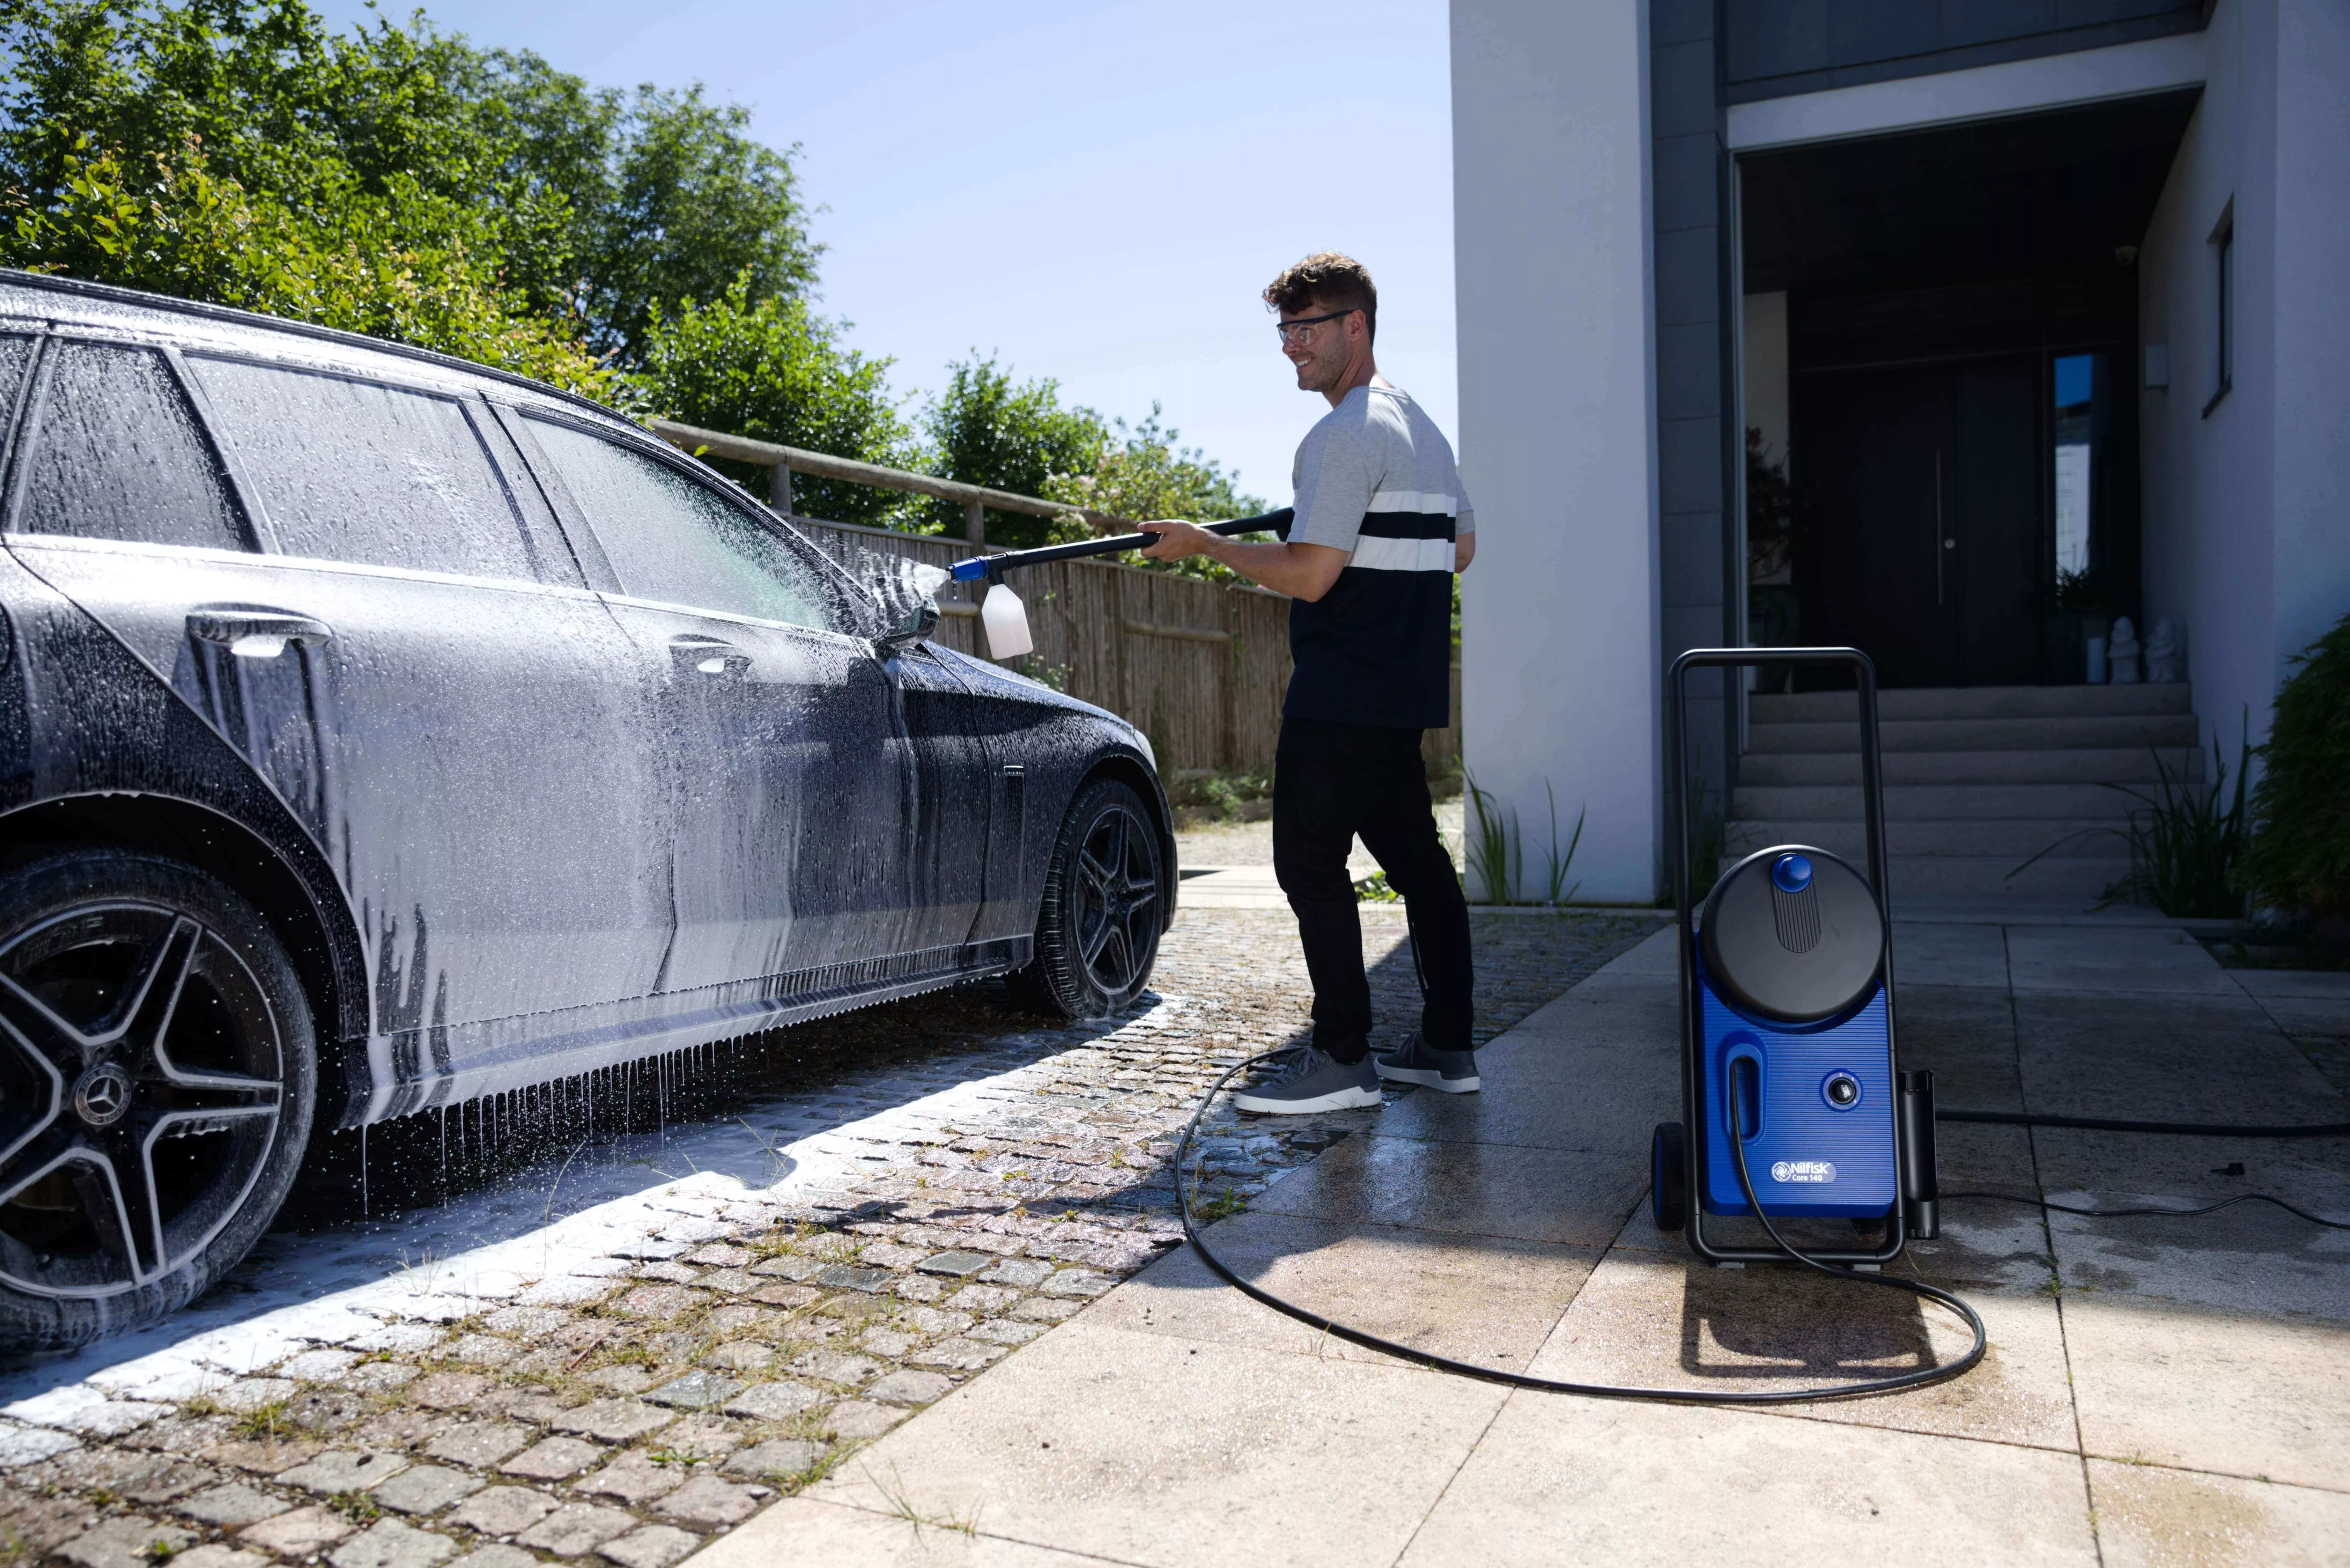 Man cleaning car with high pressure washer and super foam sprayer detergent